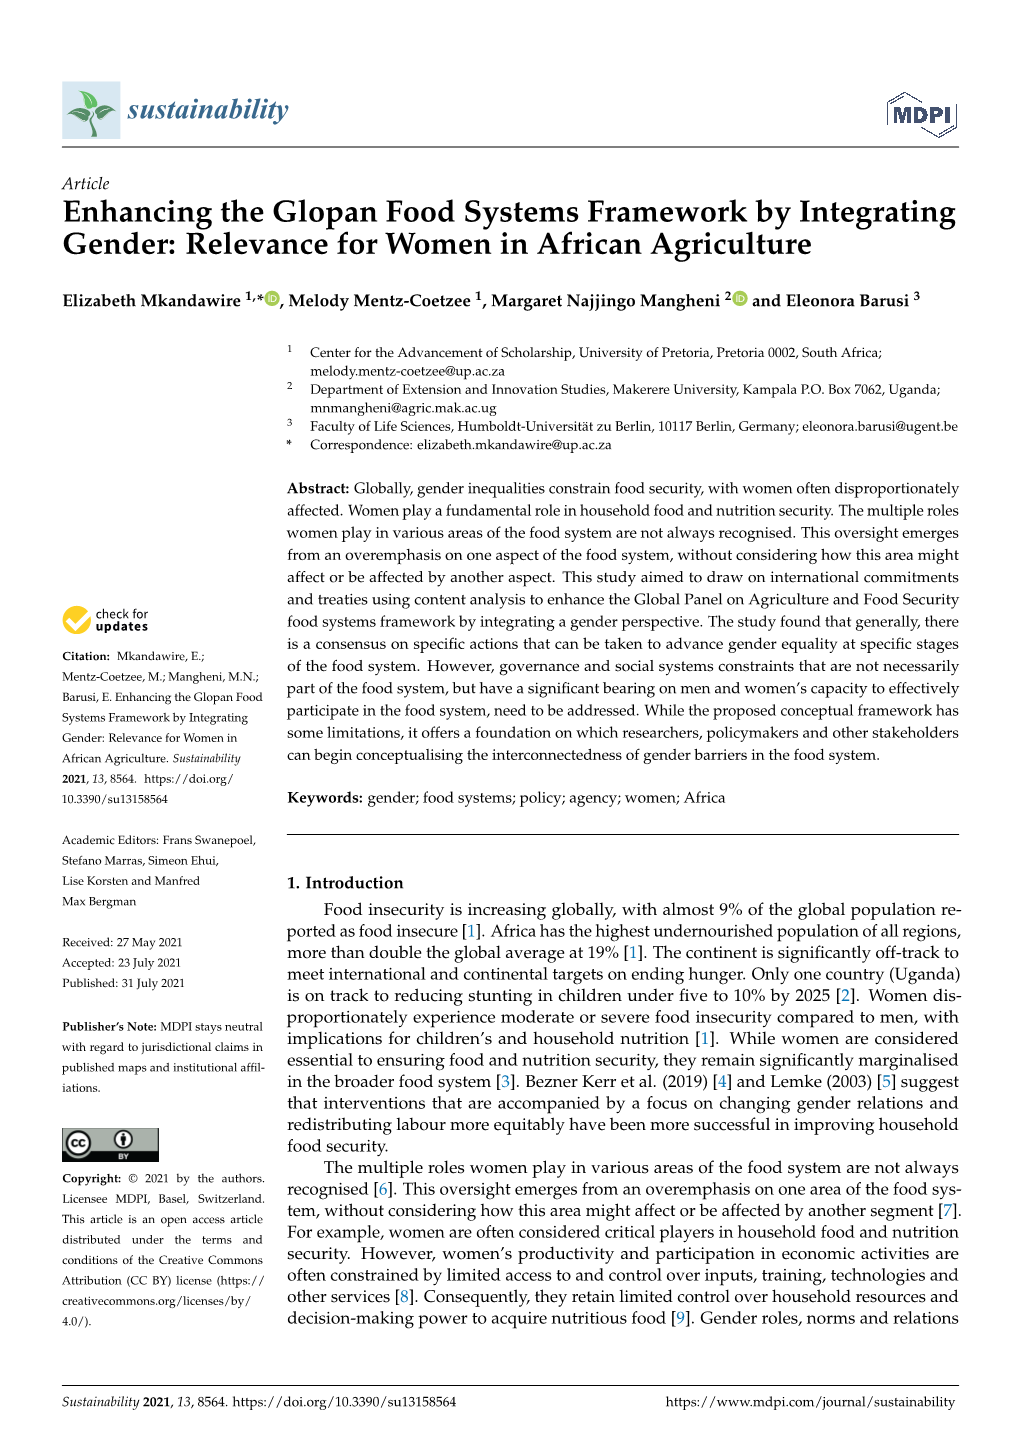 Enhancing the Glopan Food Systems Framework by Integrating Gender: Relevance for Women in African Agriculture